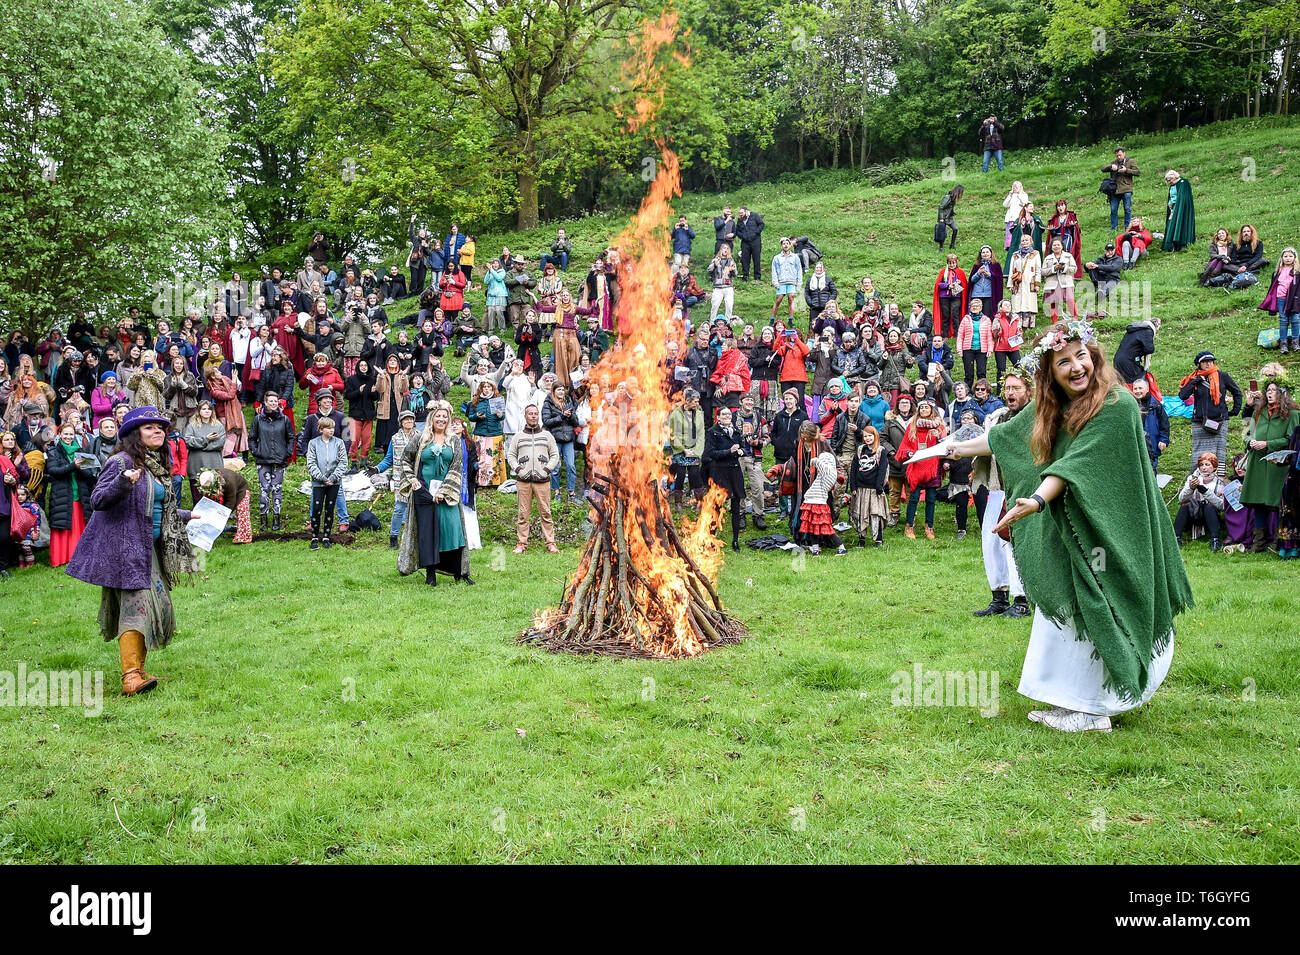 A fire is lit during the Beltane celebrations at Glastonbury Chalice Well,  where people gather to observe a modern interpretation of the ancient  Celtic pagan fertility rite of Spring Stock Photo -